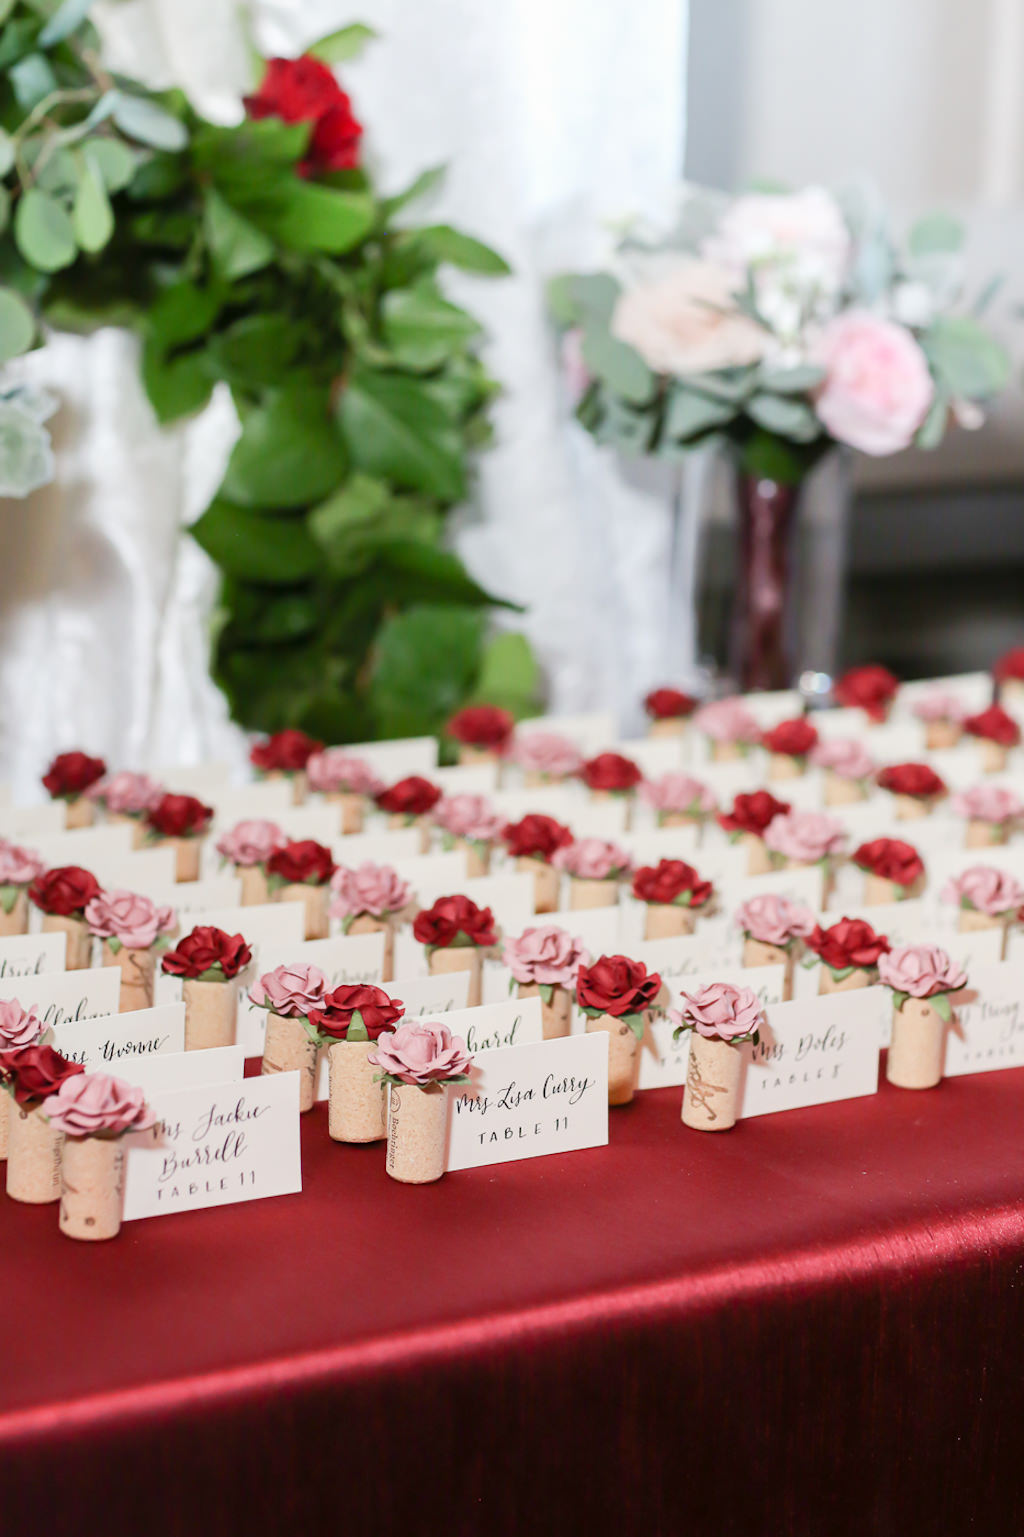 Wine Corks with Dusty Rose and Red Roses Seating Cards | Wedding Photographer Lifelong Photography Studios | Tampa Bay Wedding Planner Blue Skies Weddings and Events